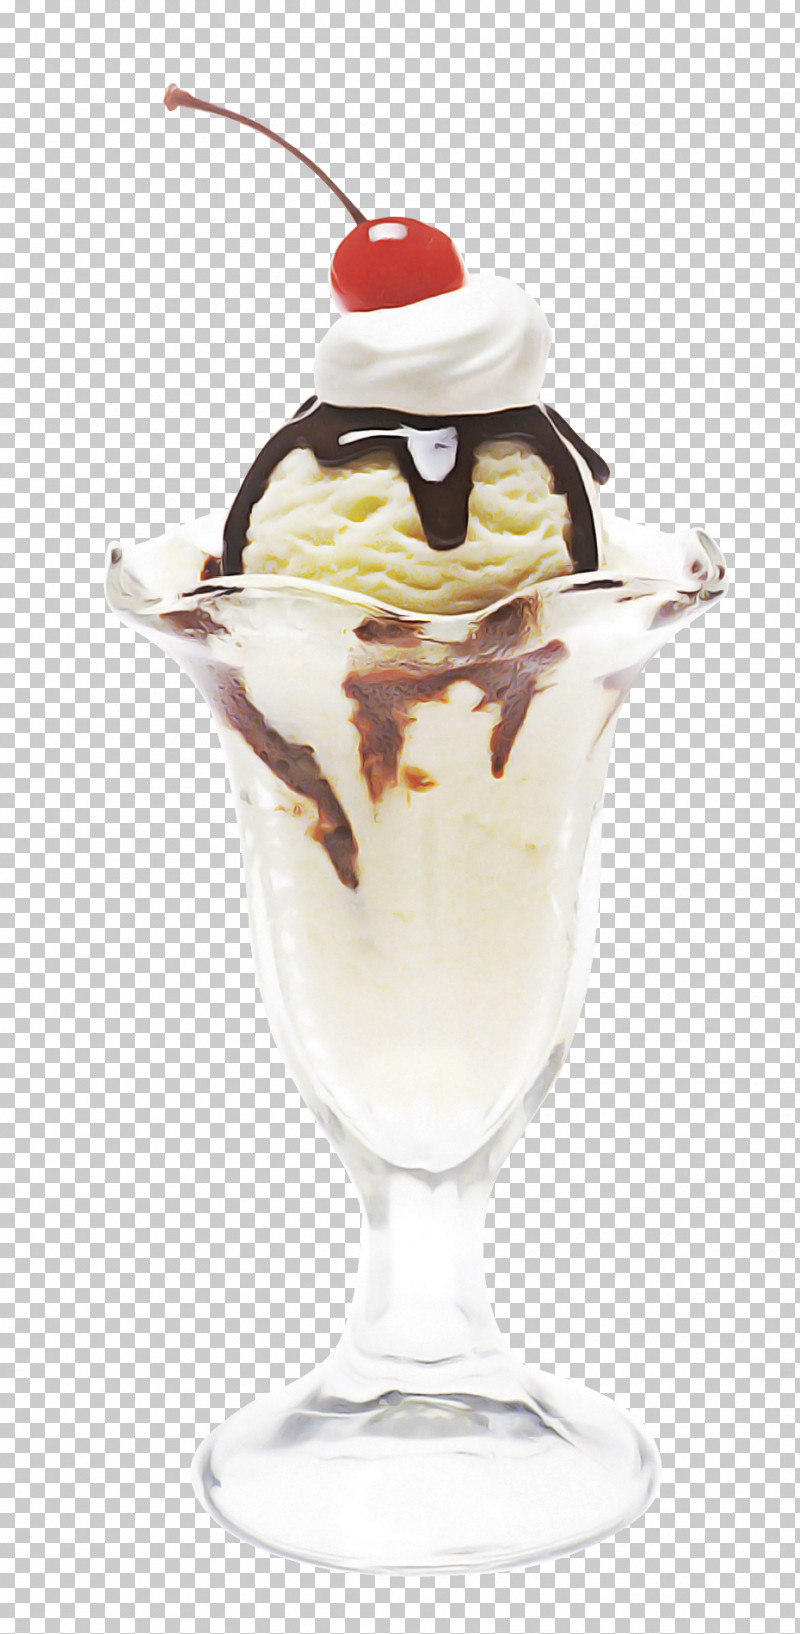 Ice Cream PNG, Clipart, Chocolate, Chocolate Ice Cream, Chocolate Syrup, Dessert, Dish Free PNG Download